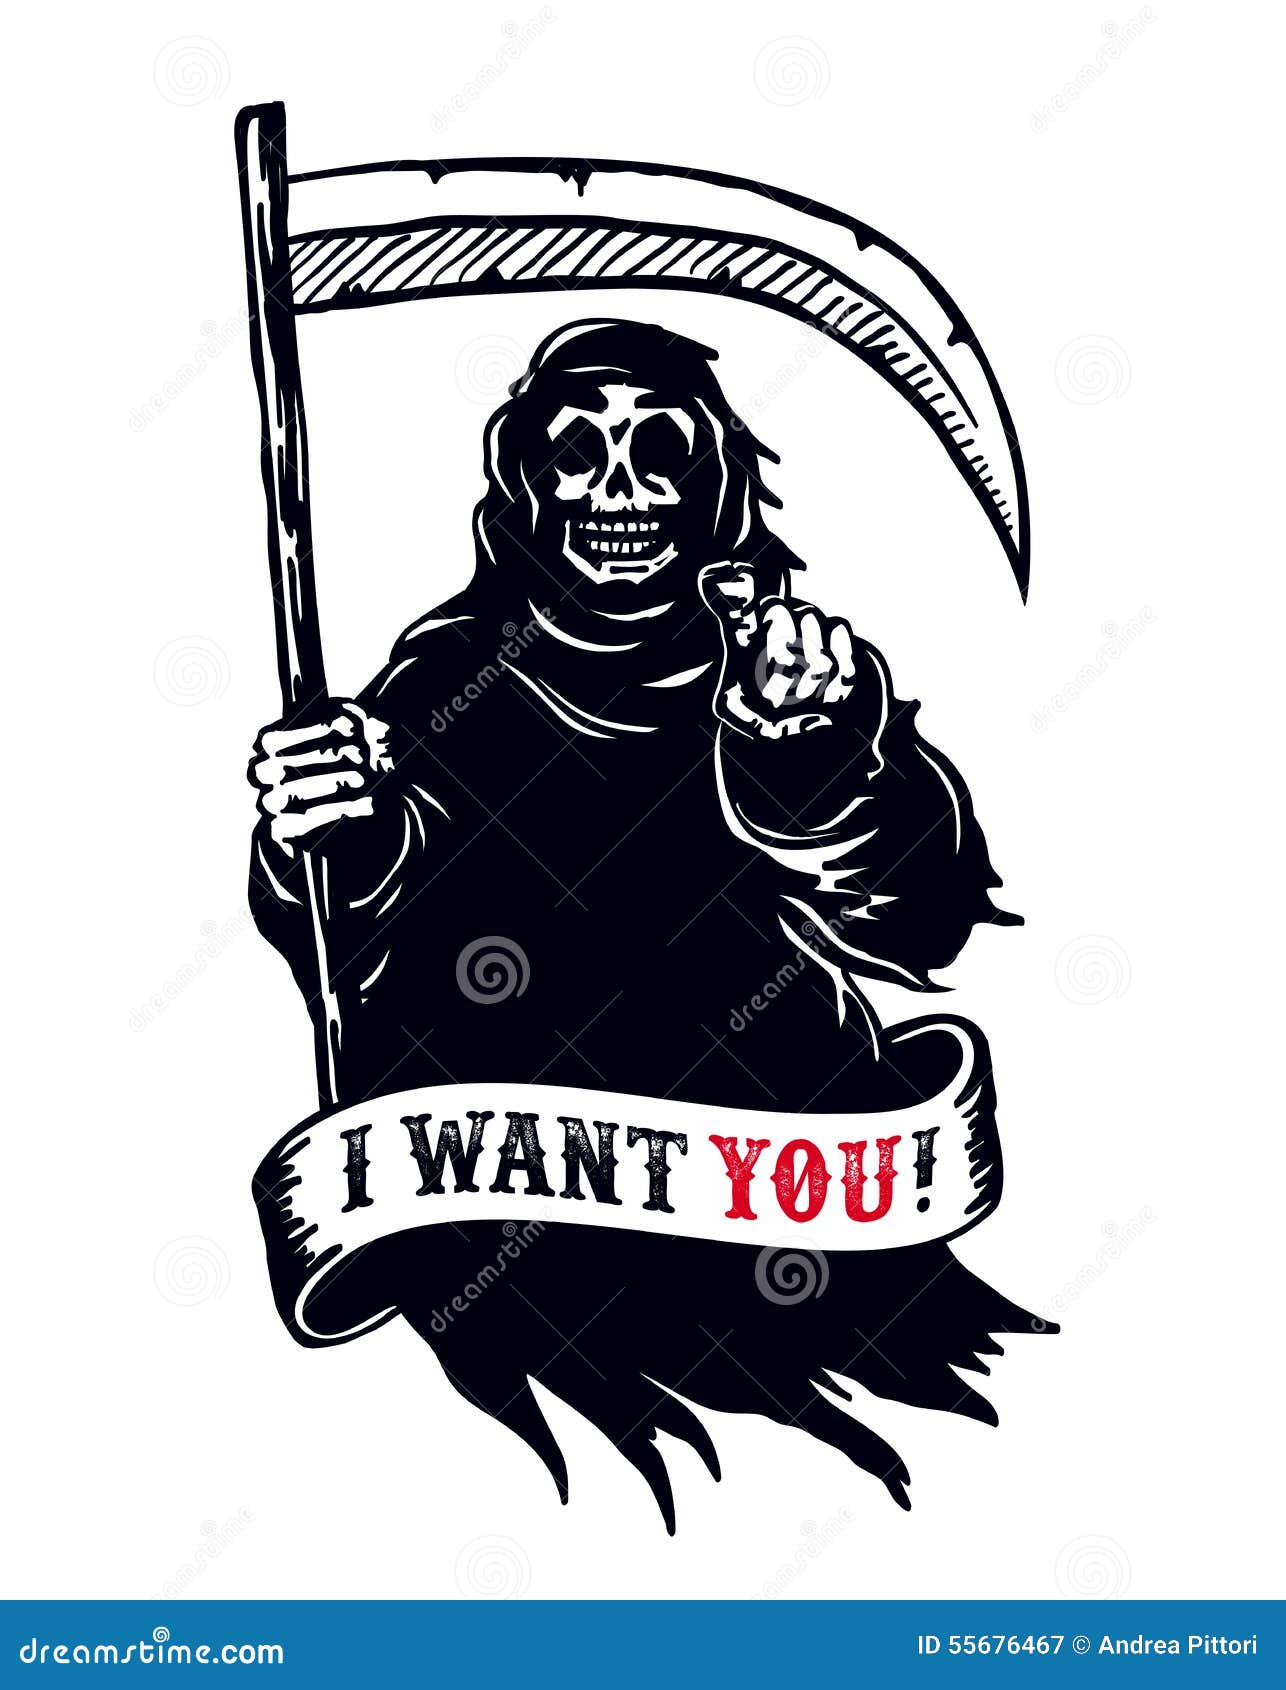 grim reaper with scythe, death pointing finger. i want you dead!